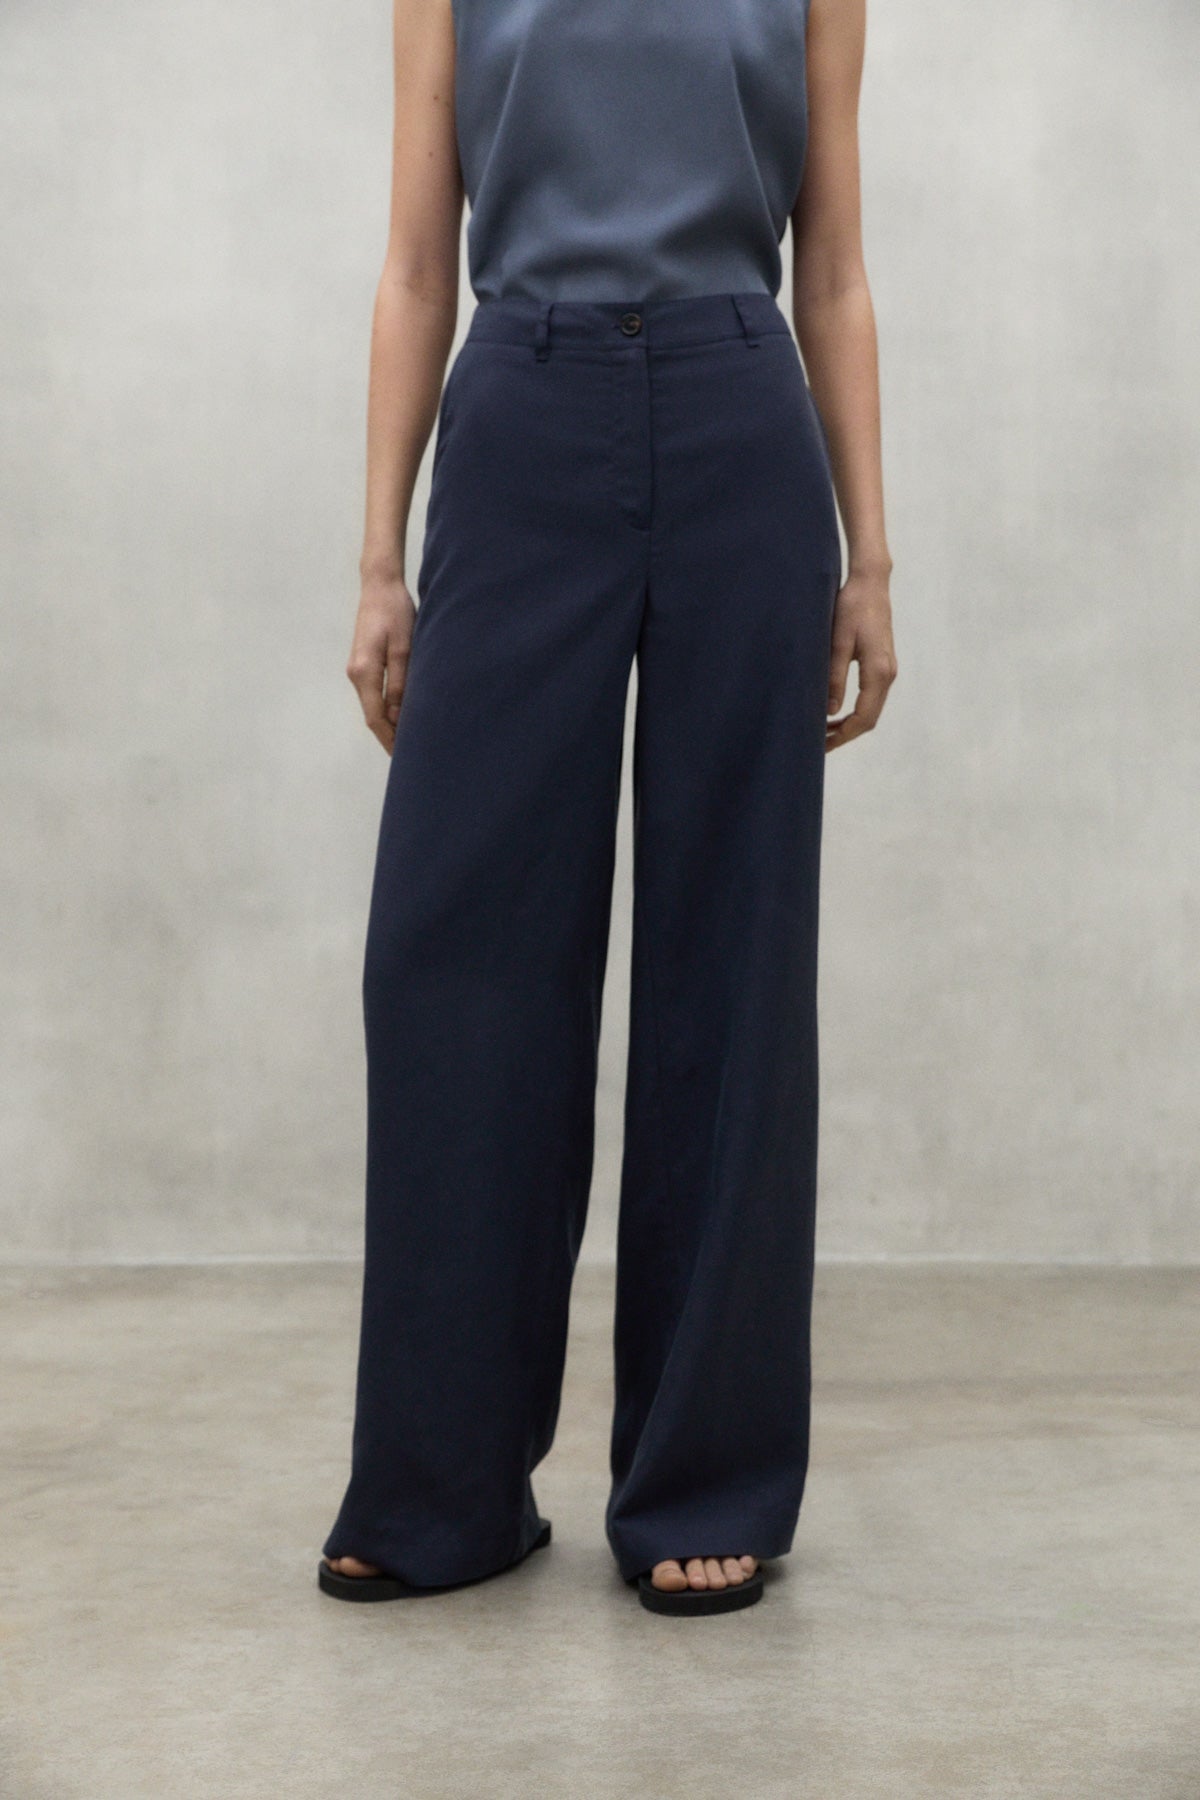 NAVY BLUE SABINE TROUSERS